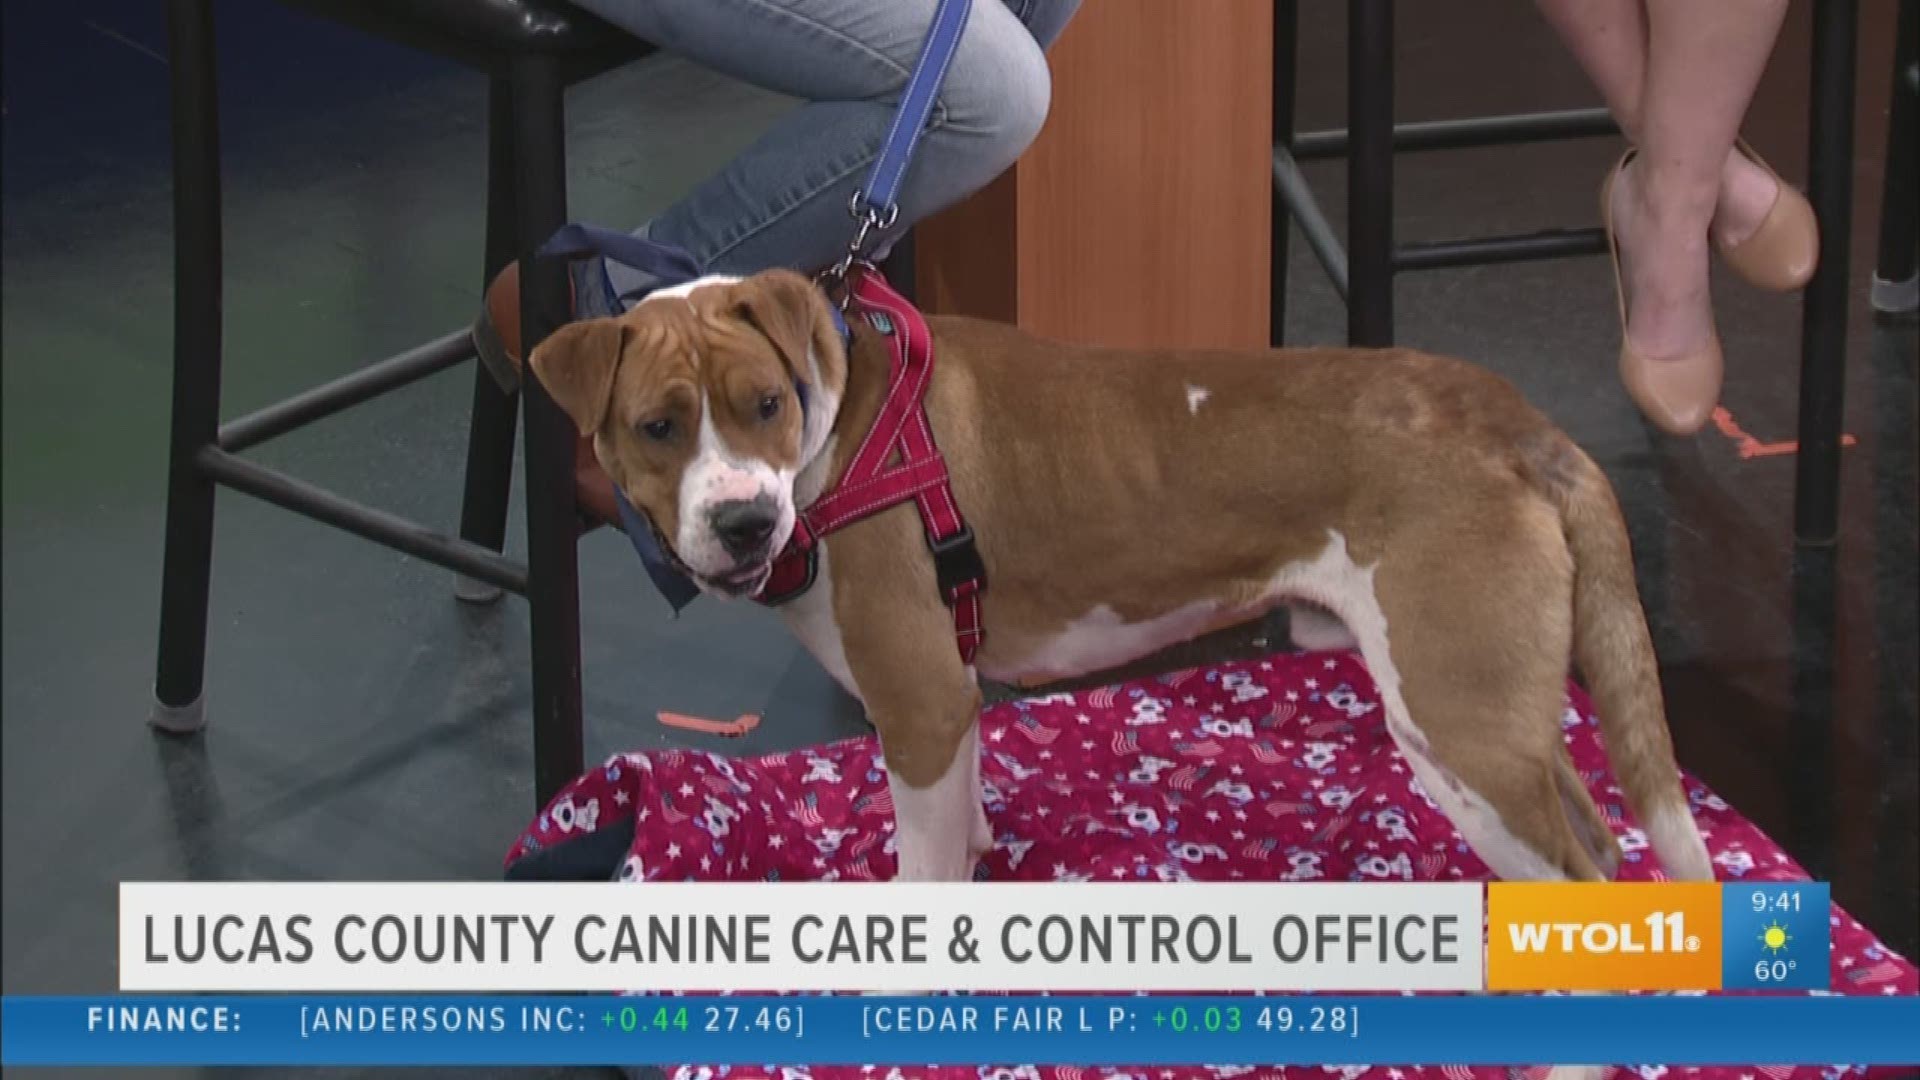 Sweet Bumble is at Lucas County Canine Care and Control waiting for you to give her a home!